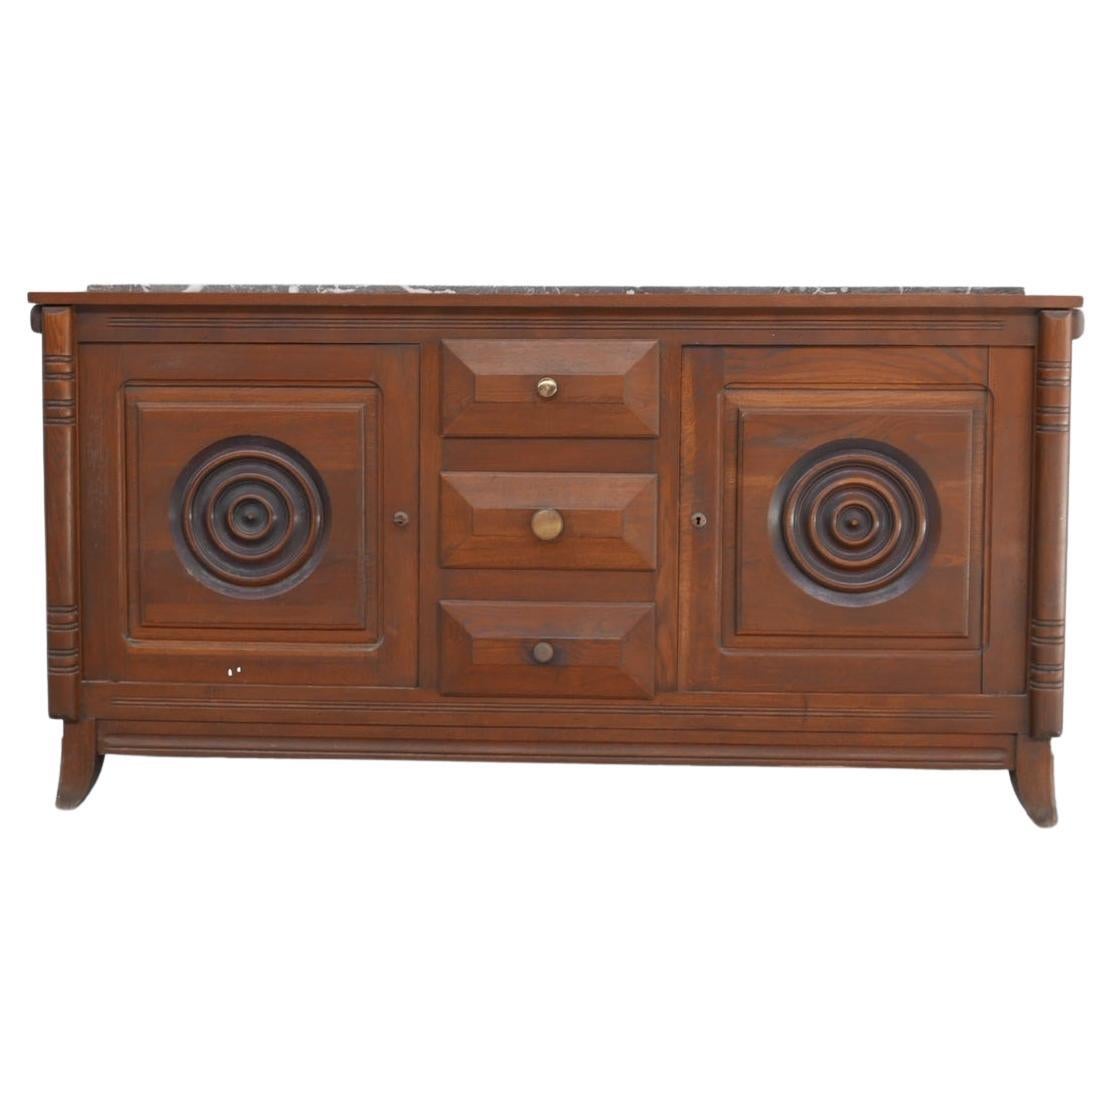 Dudouyt Style French Art Deco Oak and Marble Sideboard